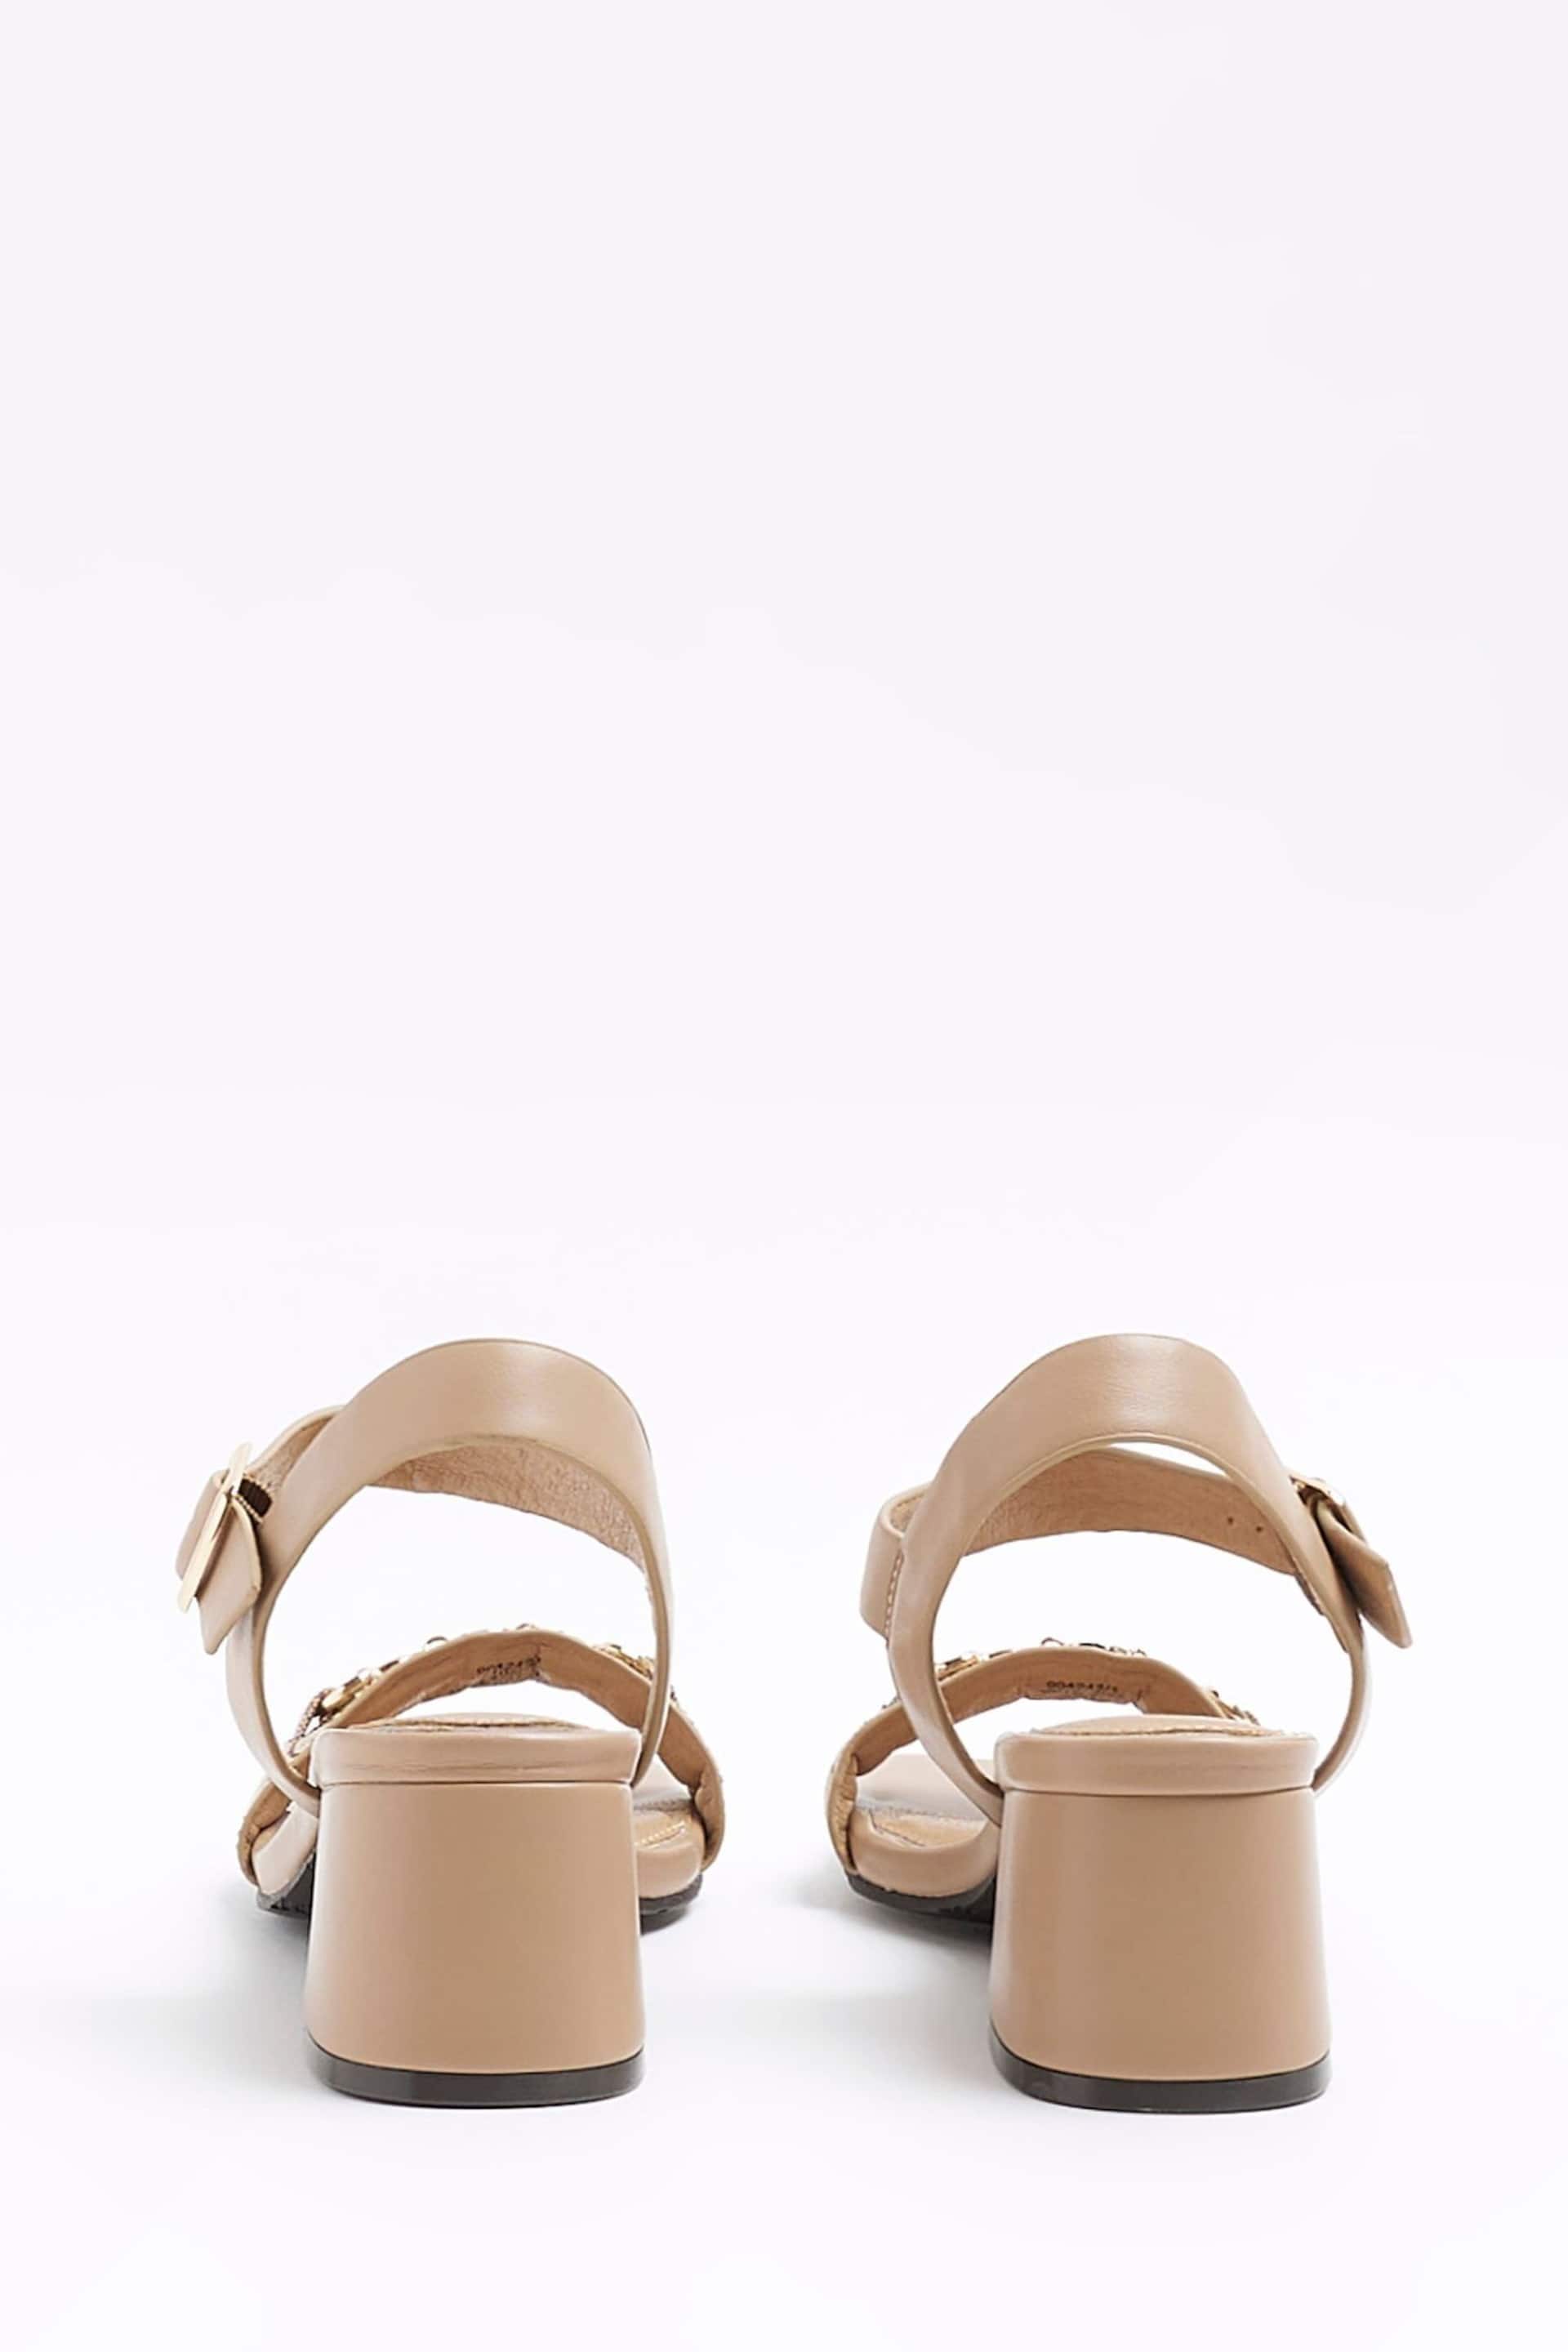 River Island Brown Snaffle Low Block Heeled Sandals - Image 3 of 4